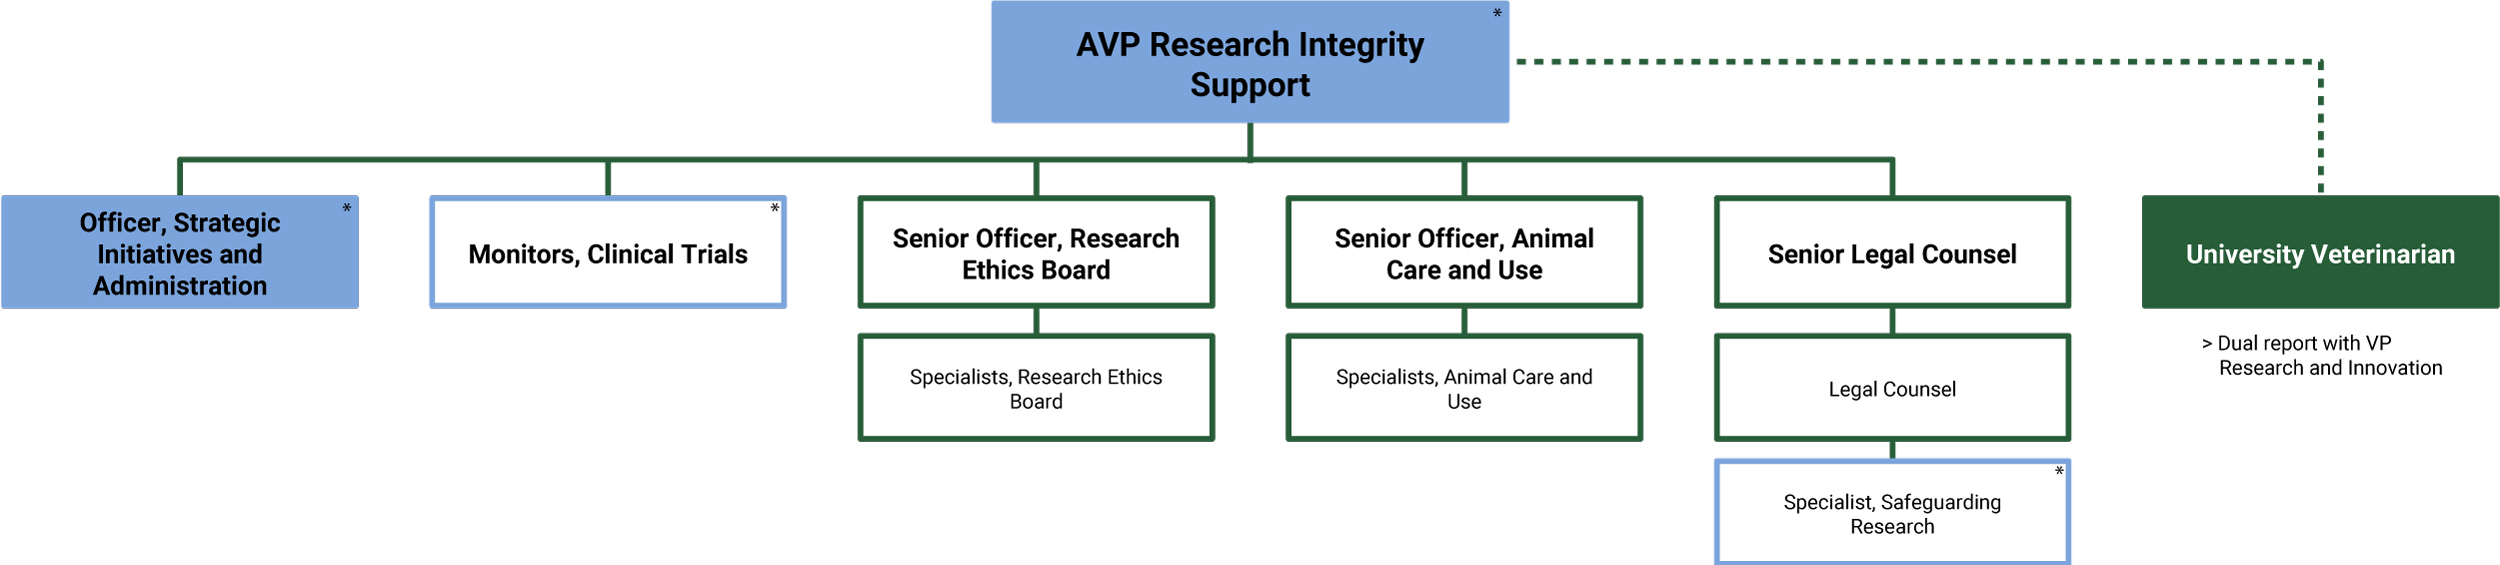 Organizational chart representing AVP Research Integrity Support